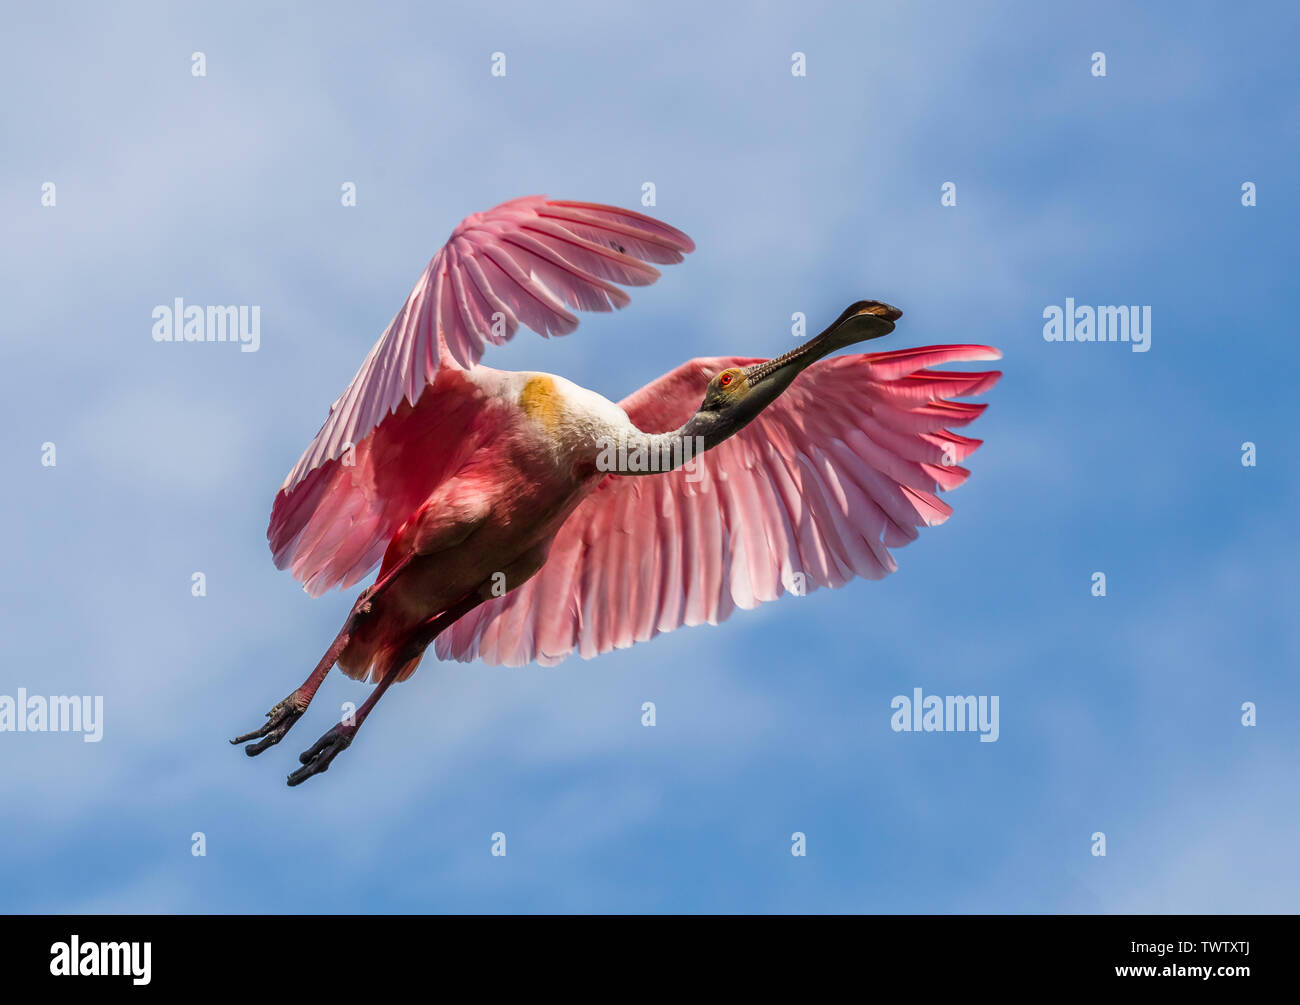 Pink Roseate Spoonbill flying overhead in a blue sky Stock Photo